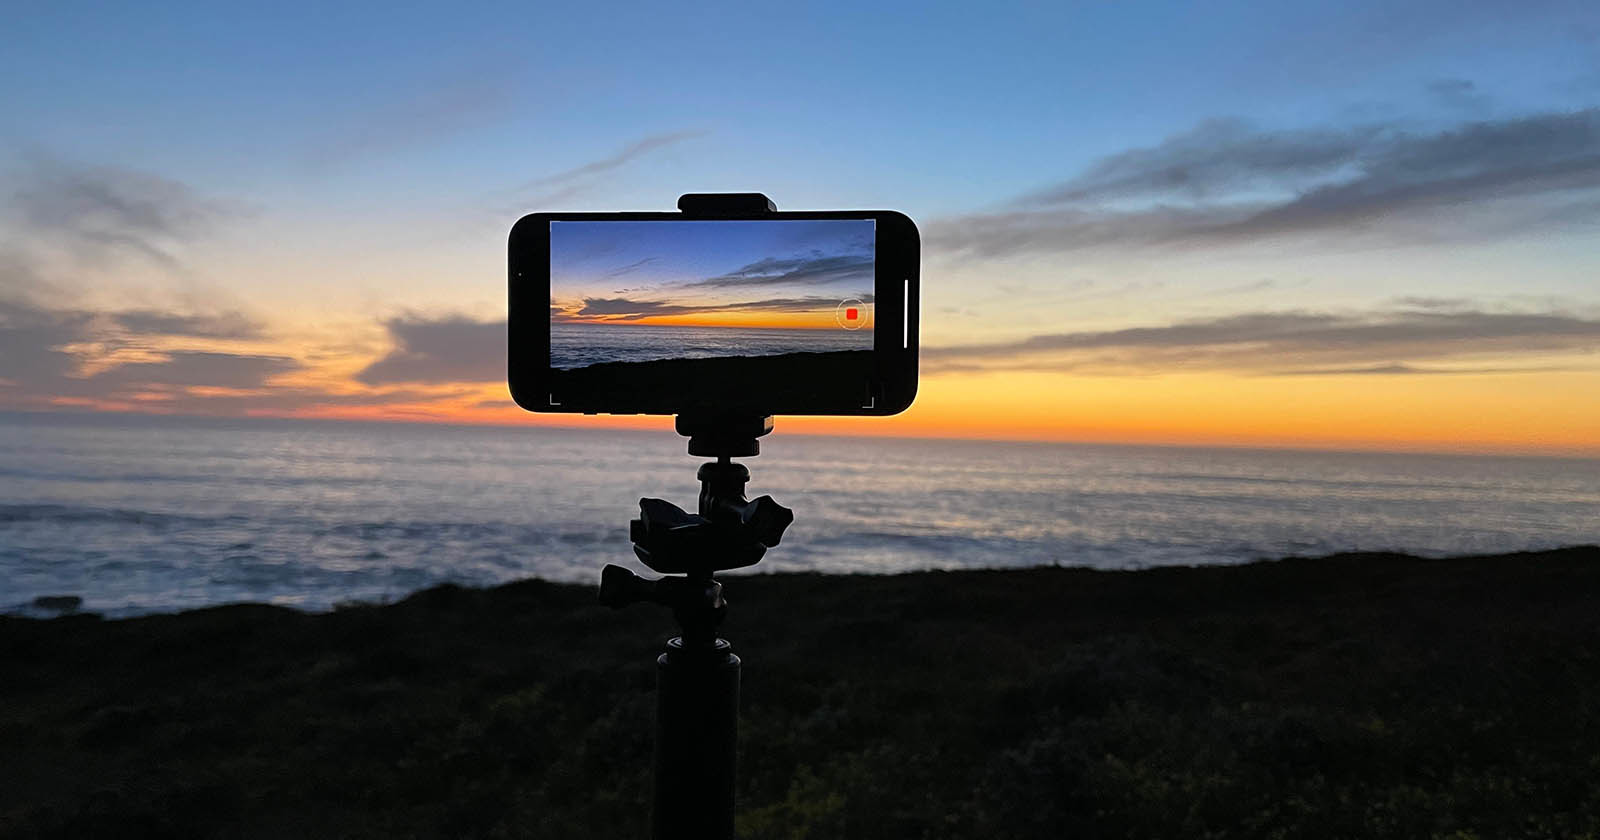 10 Tips and Tricks for Shooting Better Smartphone Photos